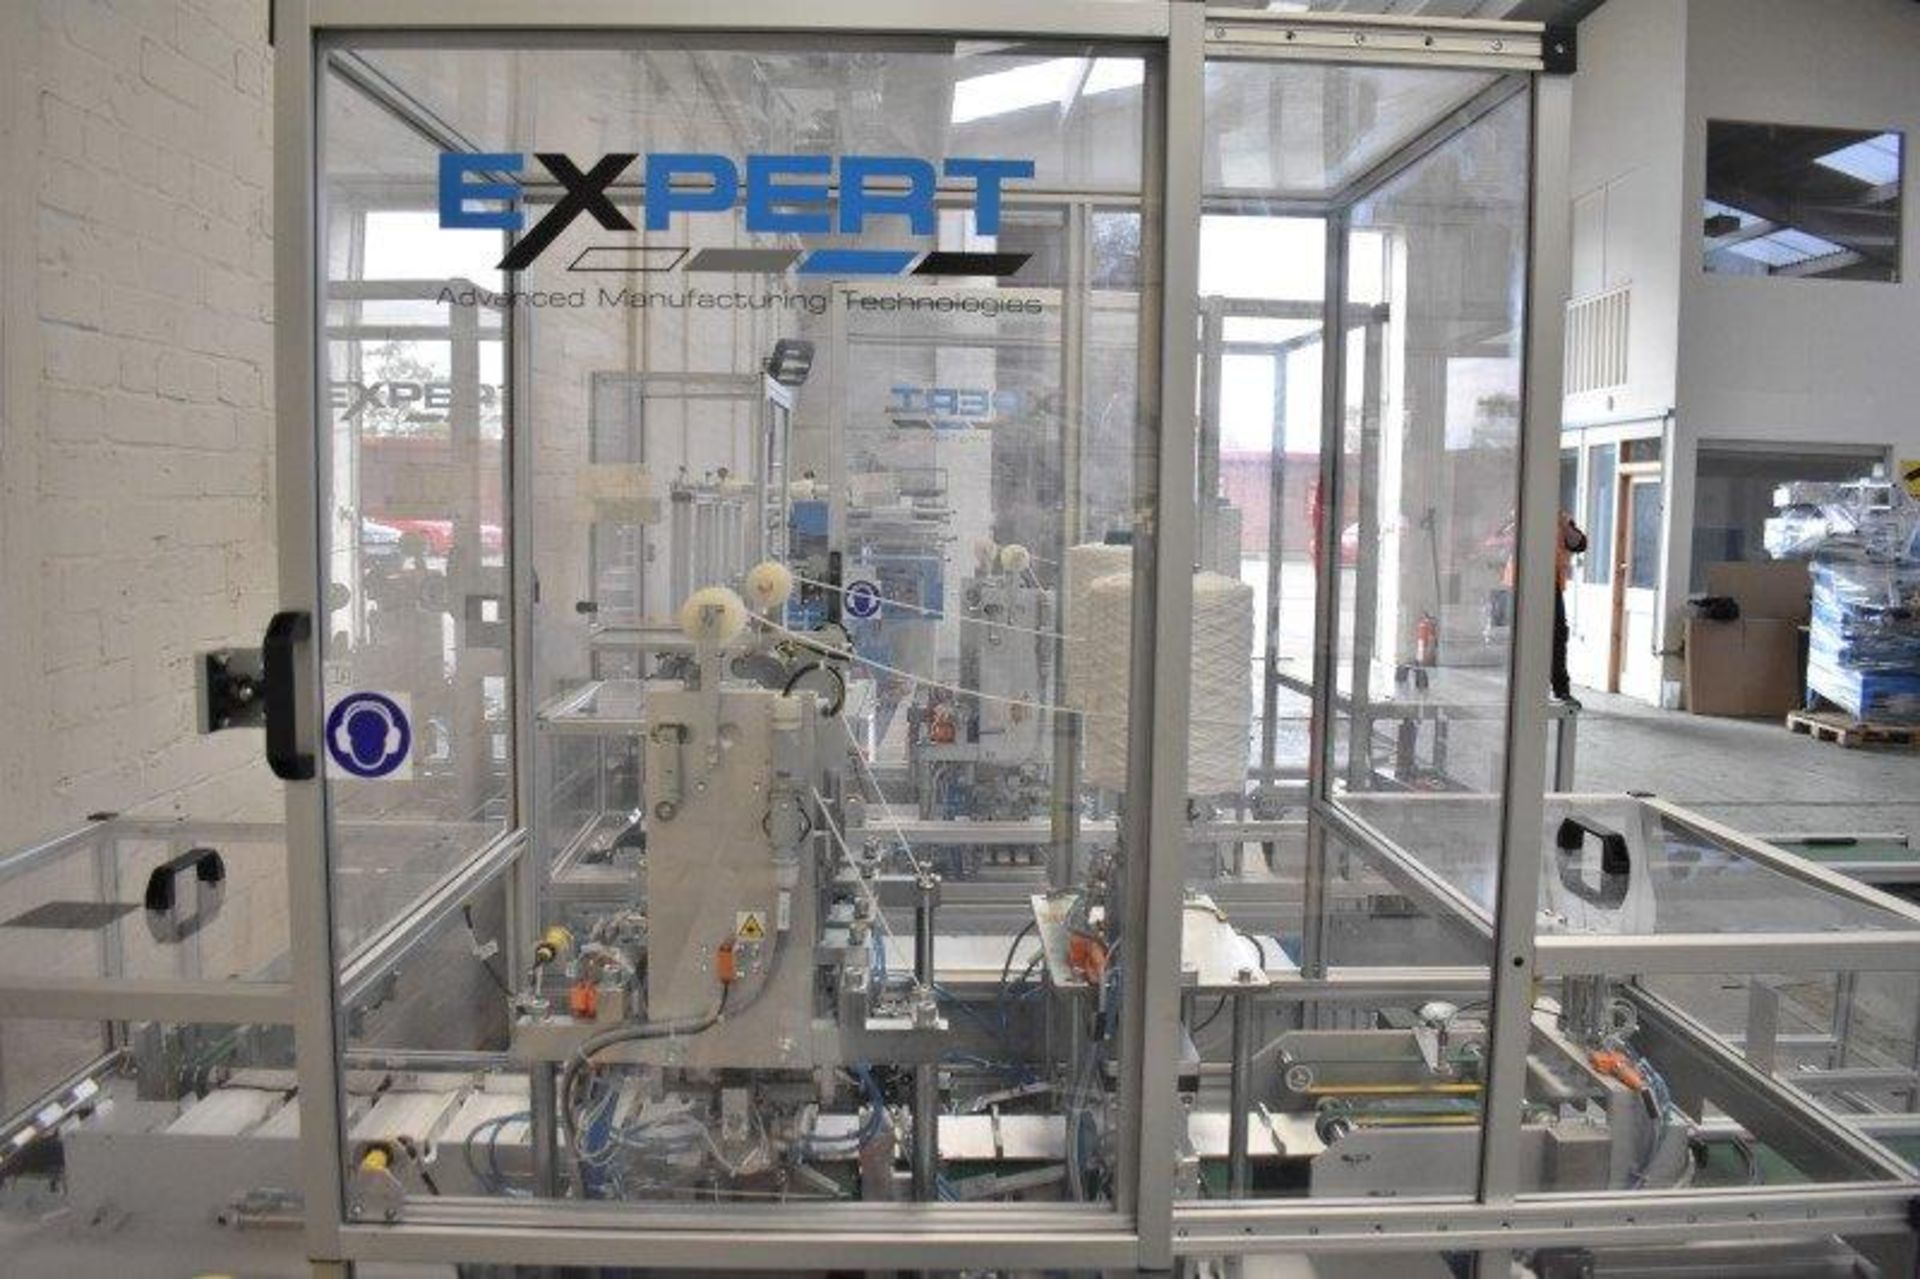 Expert fully automated Mask Making Machine - manufactured in 2020 - Image 19 of 21